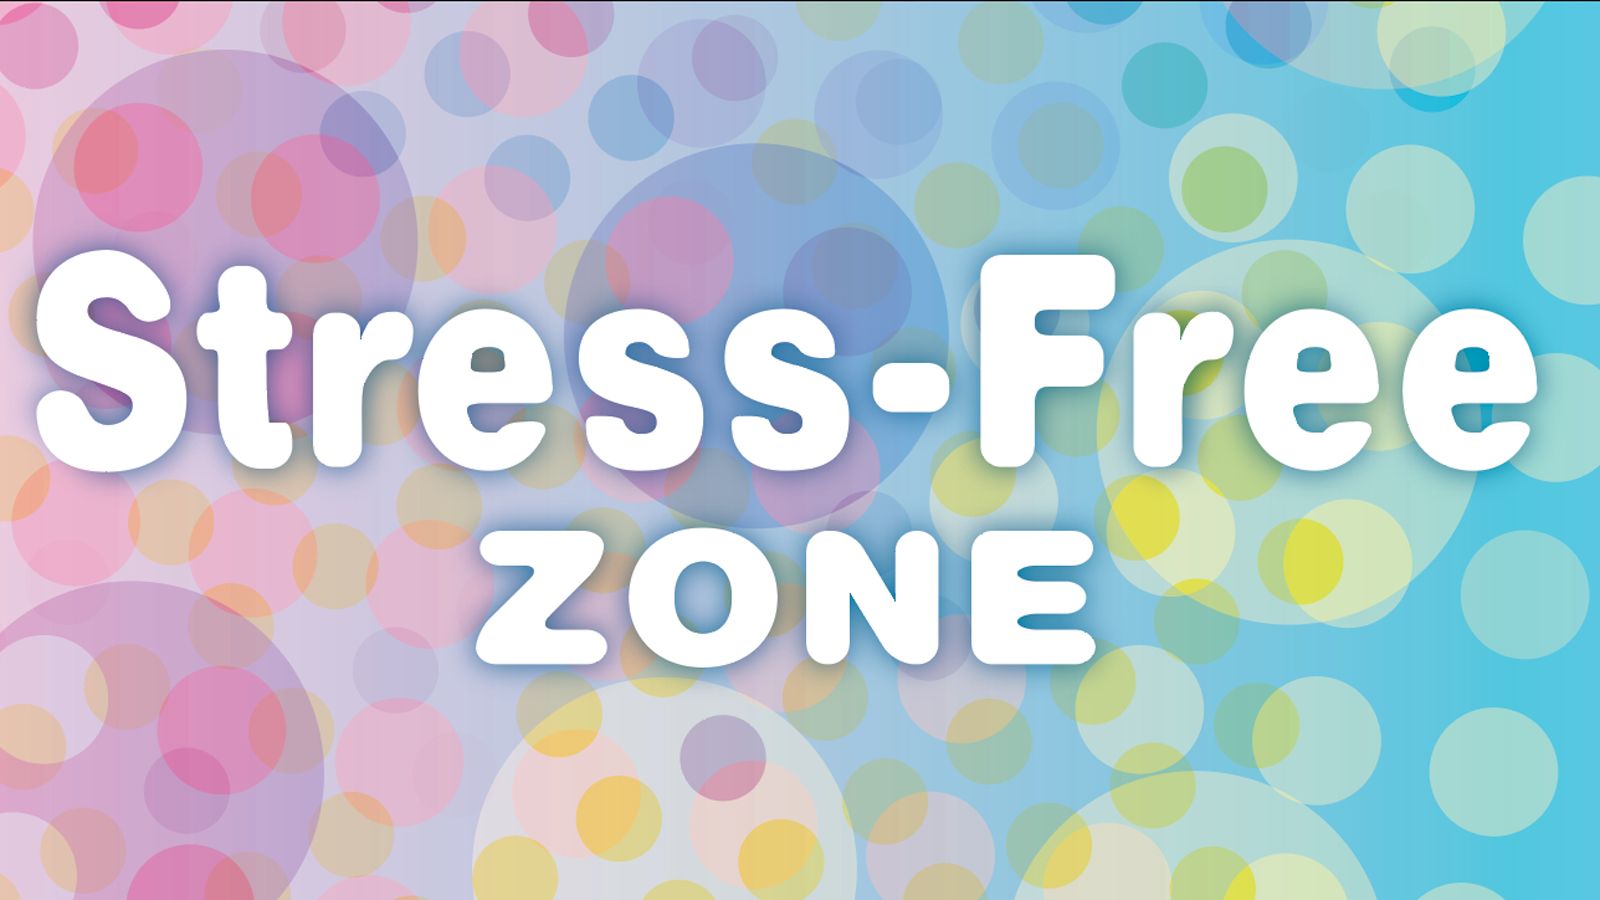 Image of flowing circles in soothing colors to illustrate the Stress-free Zone